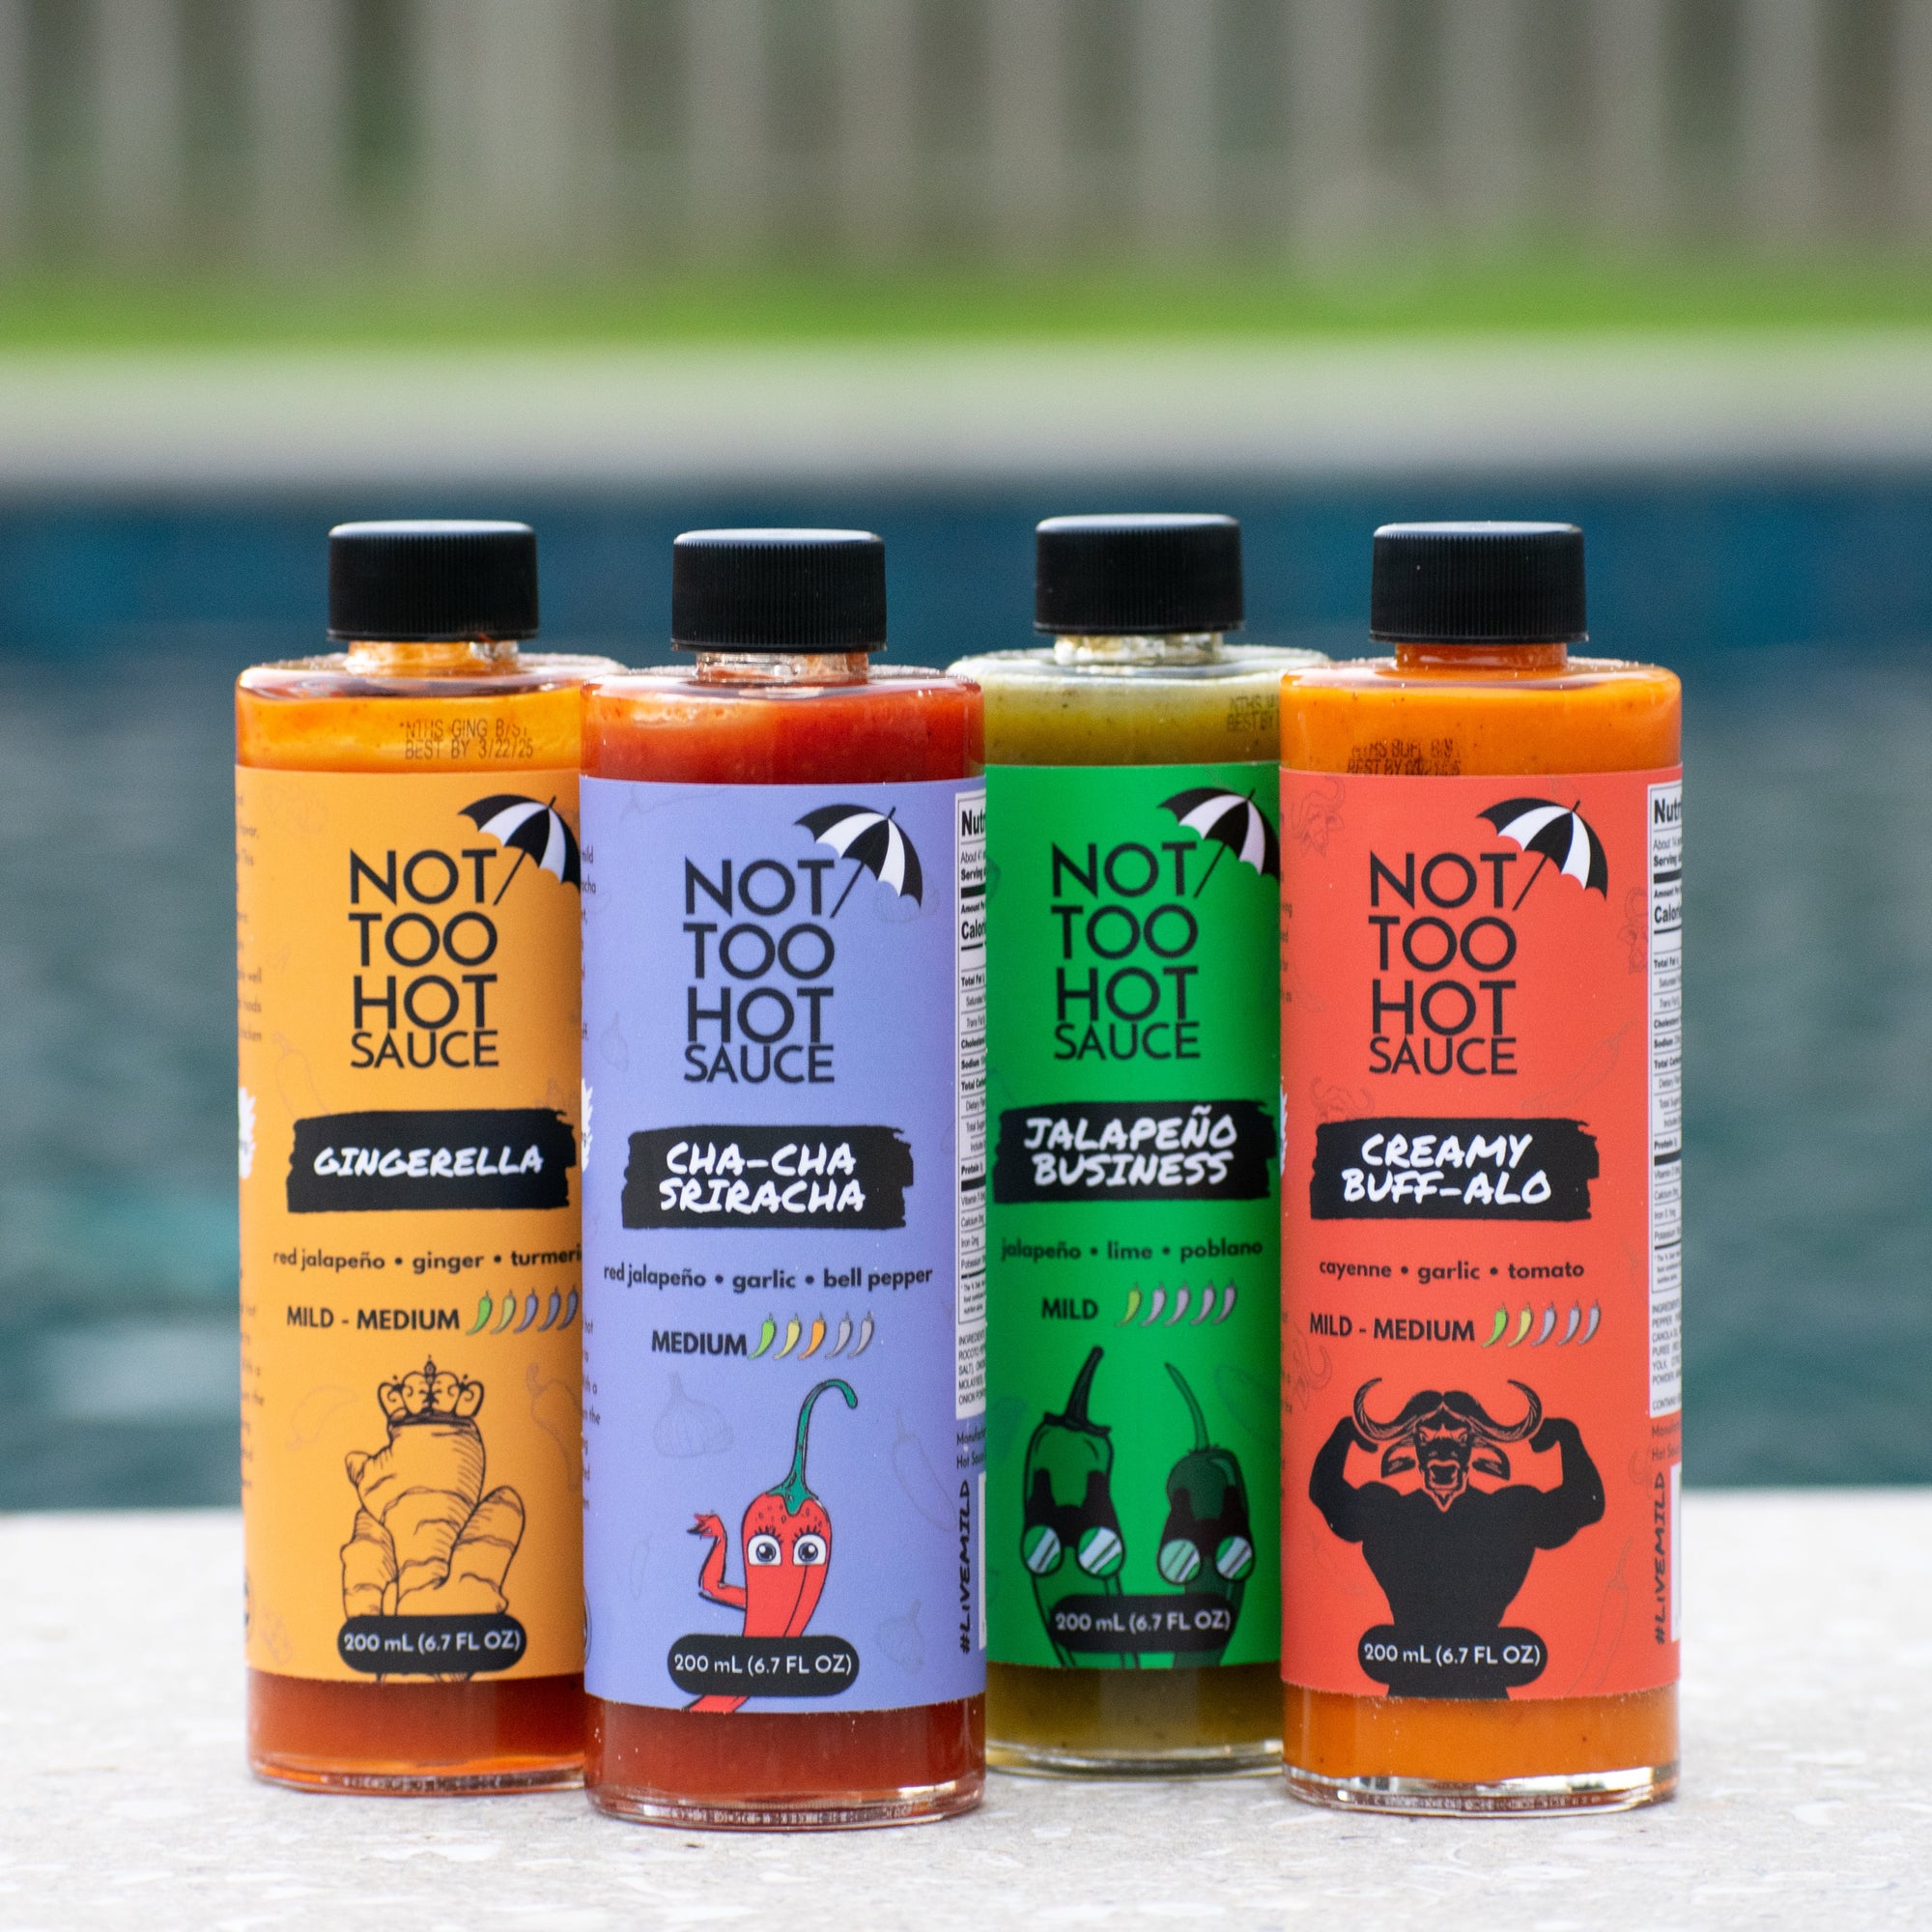 Classic Hot Sauce Variety Pack Not Too Hot Sauce